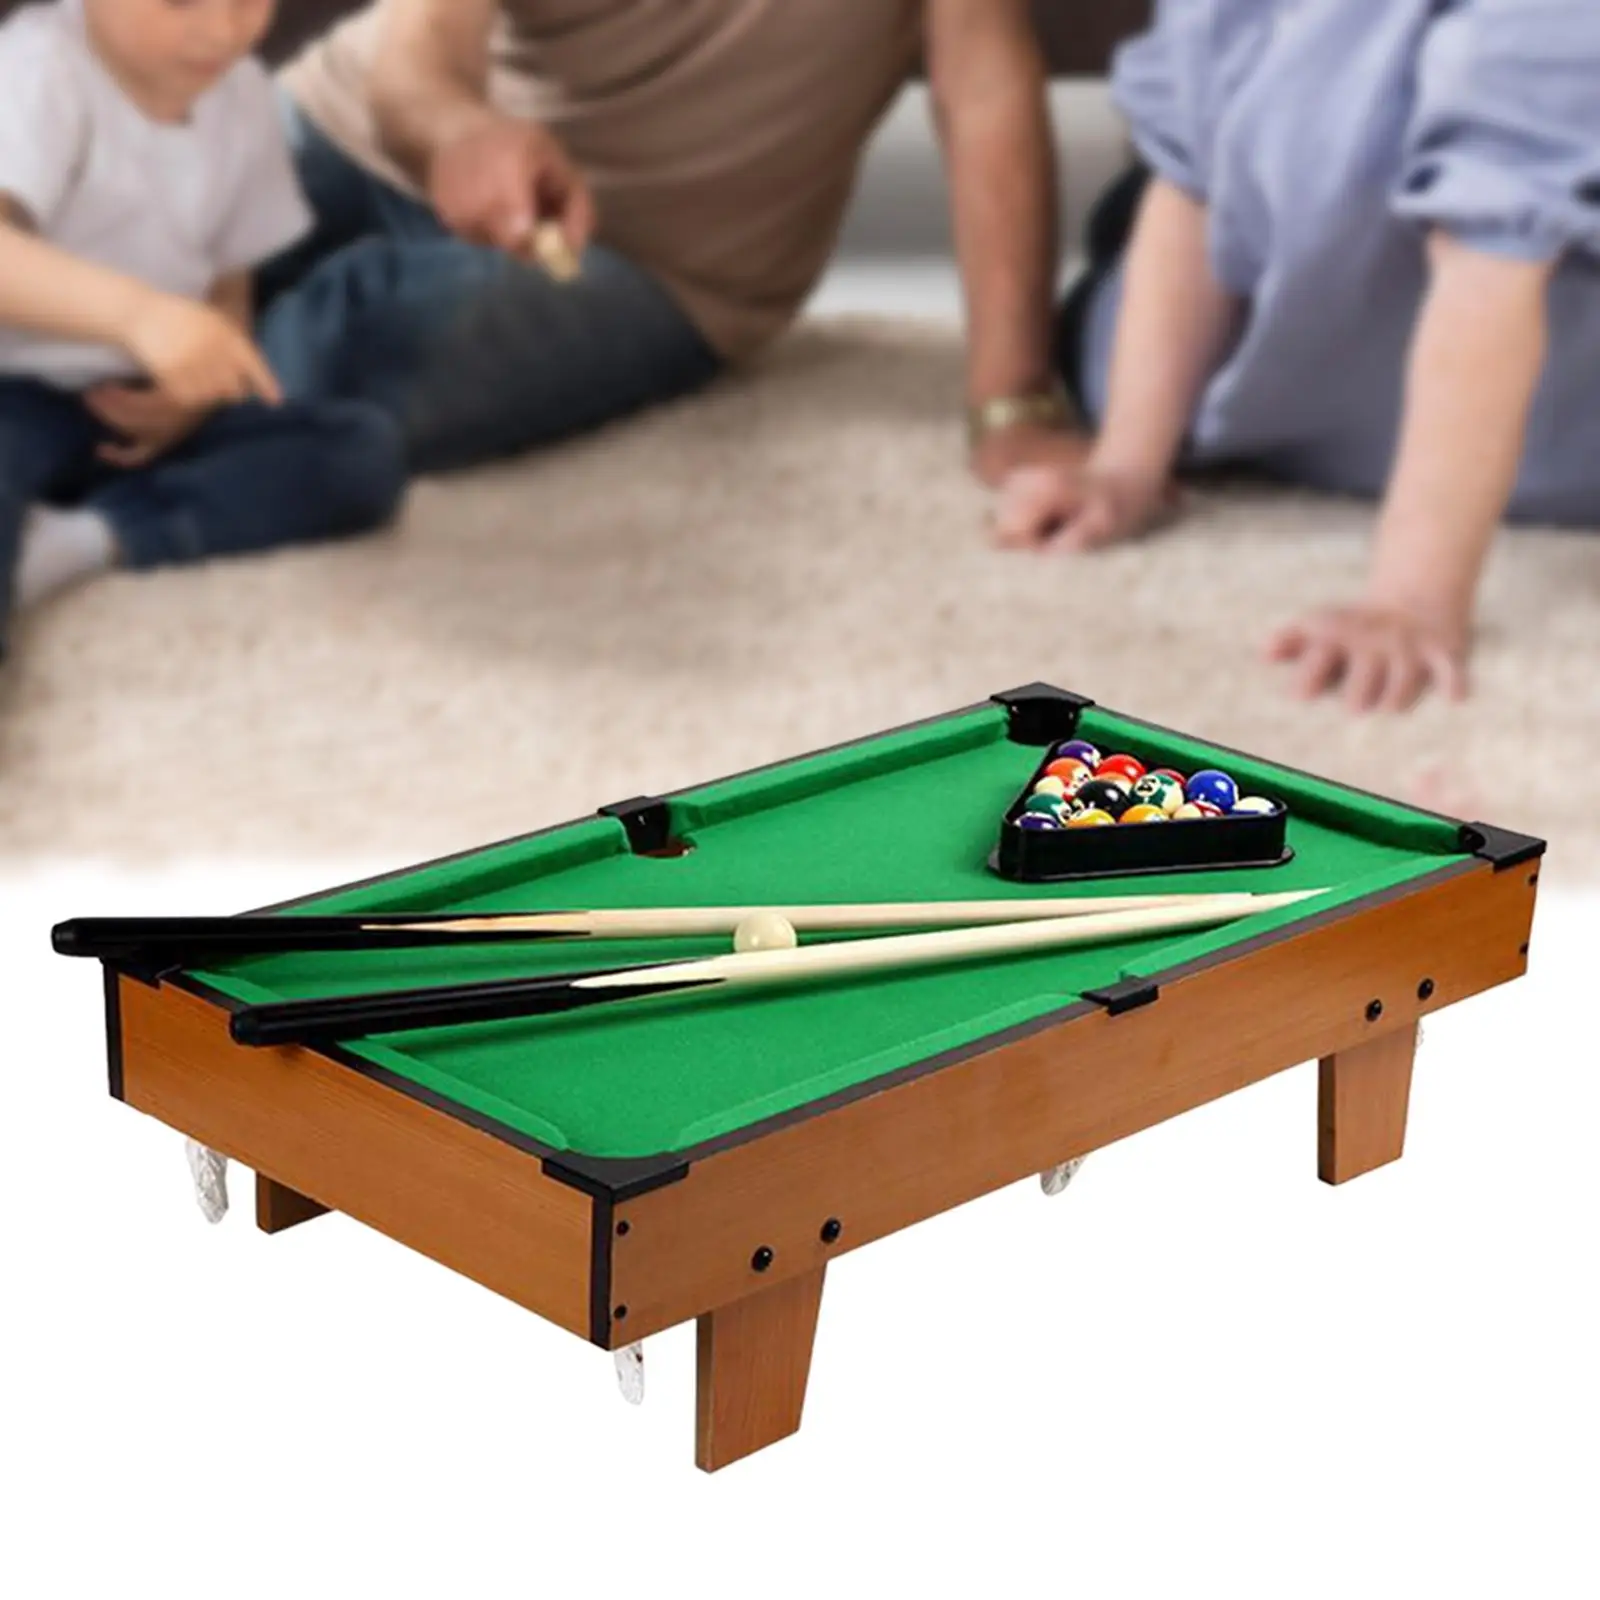 Durable Pool Table Set Indoor Game Toy Interaction Toys 15 Colorful Balls, 1 Cue Ball Board Games Tabletop Billiards for Bedroom